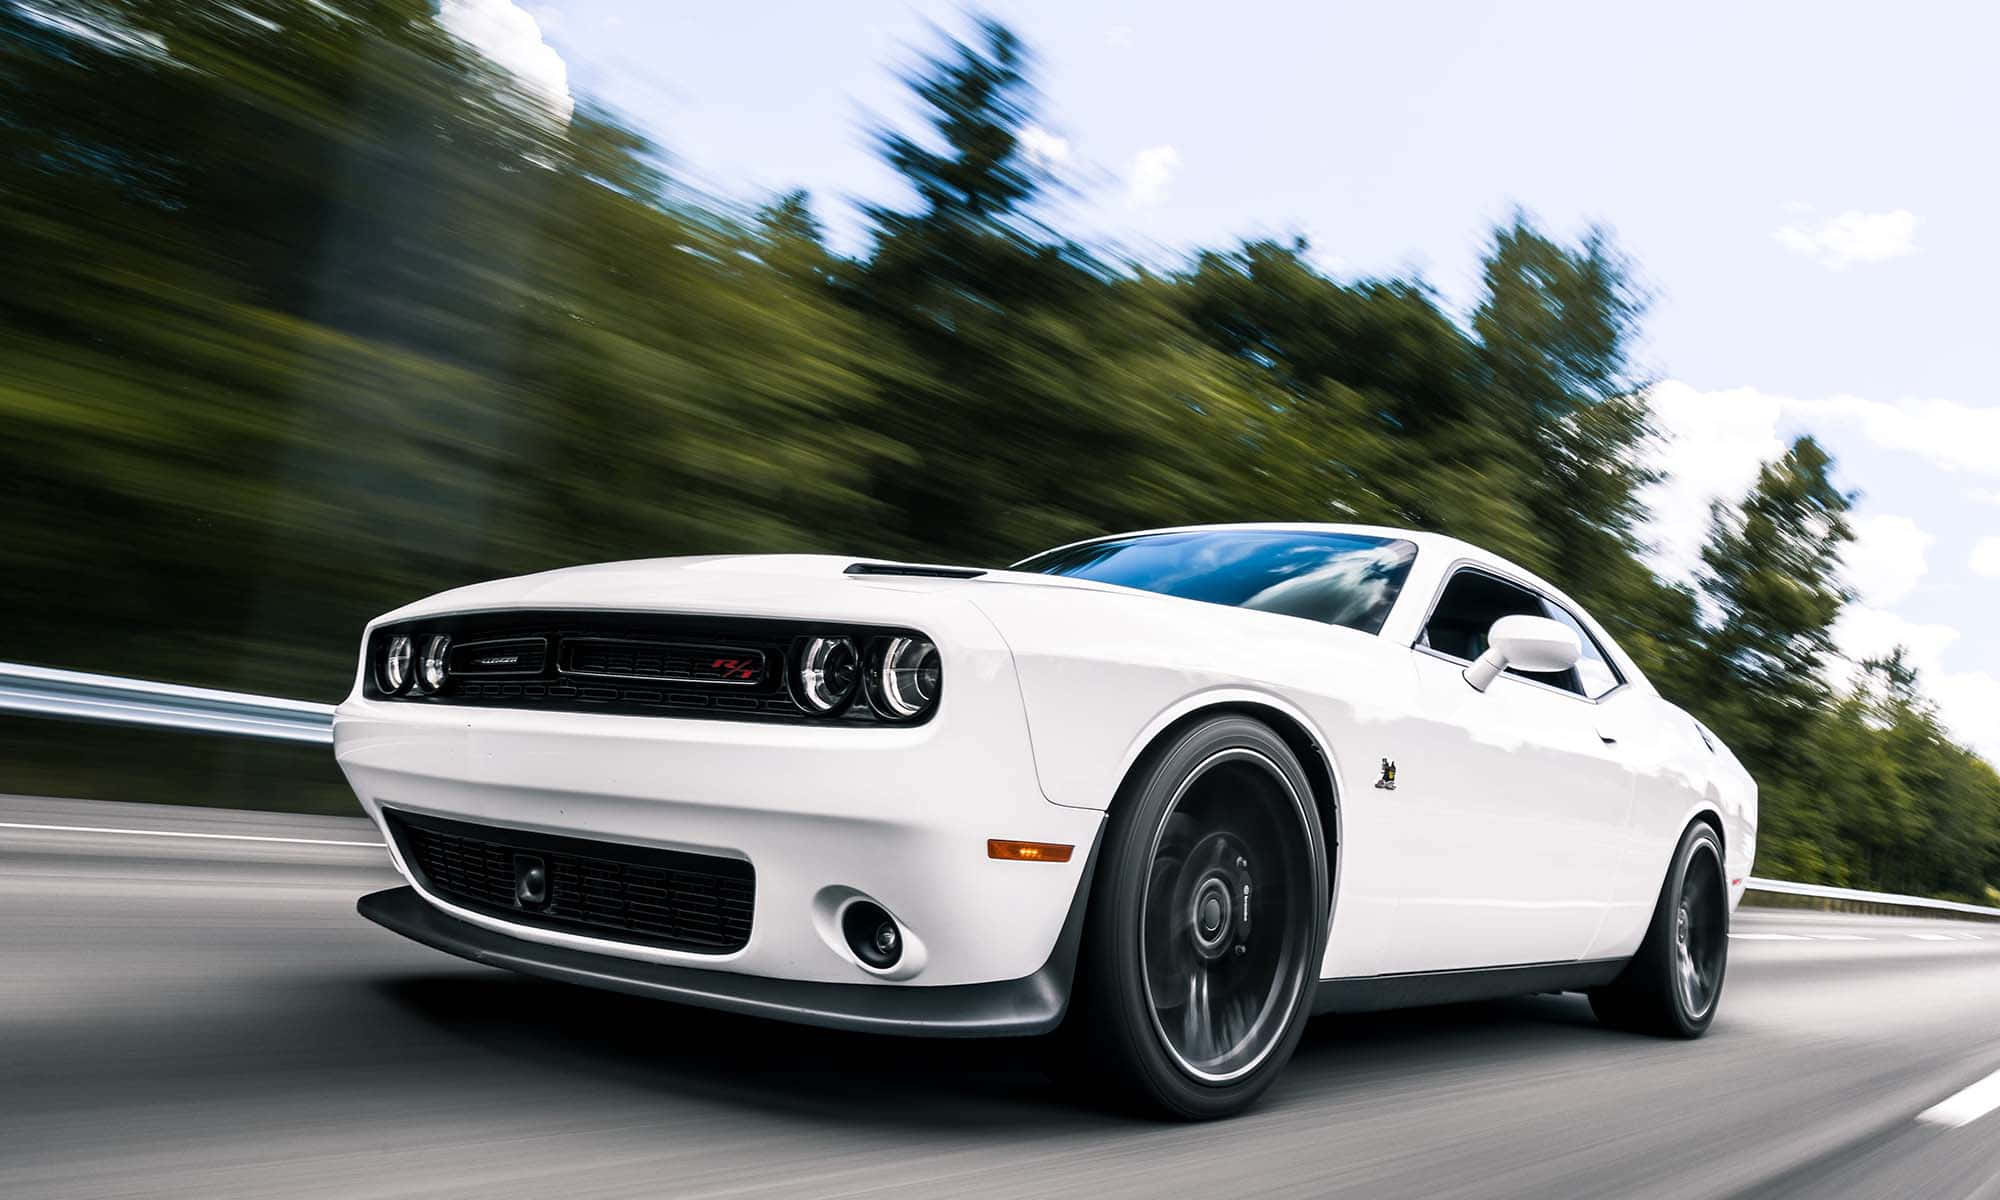 Get Ready To Experience the Thrill of the Road With Dodge